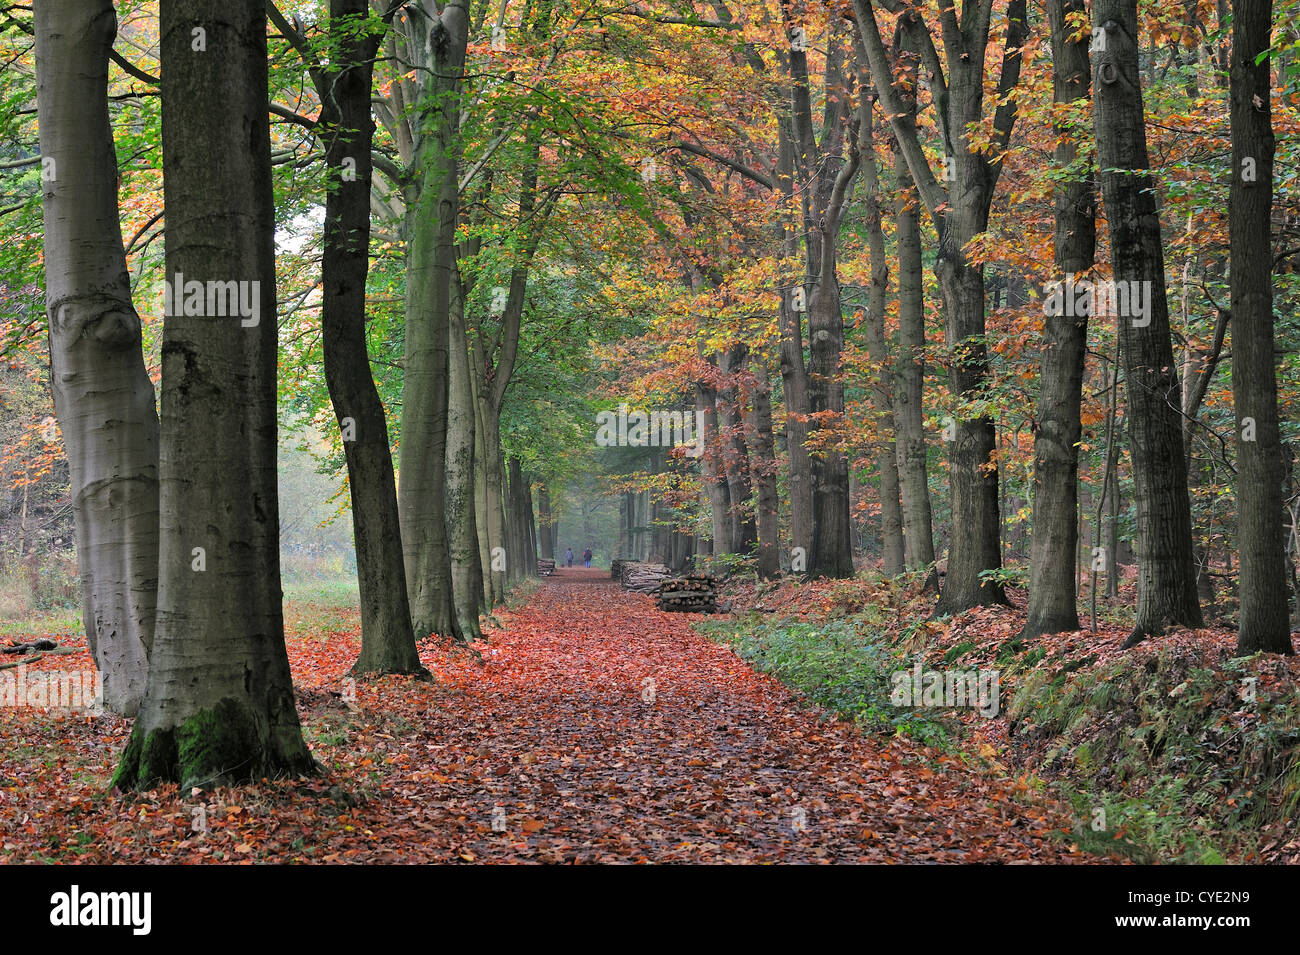 Walkers walking through colourful forest lane with foliage of broad-leaved beech trees showing autumn colours Stock Photo